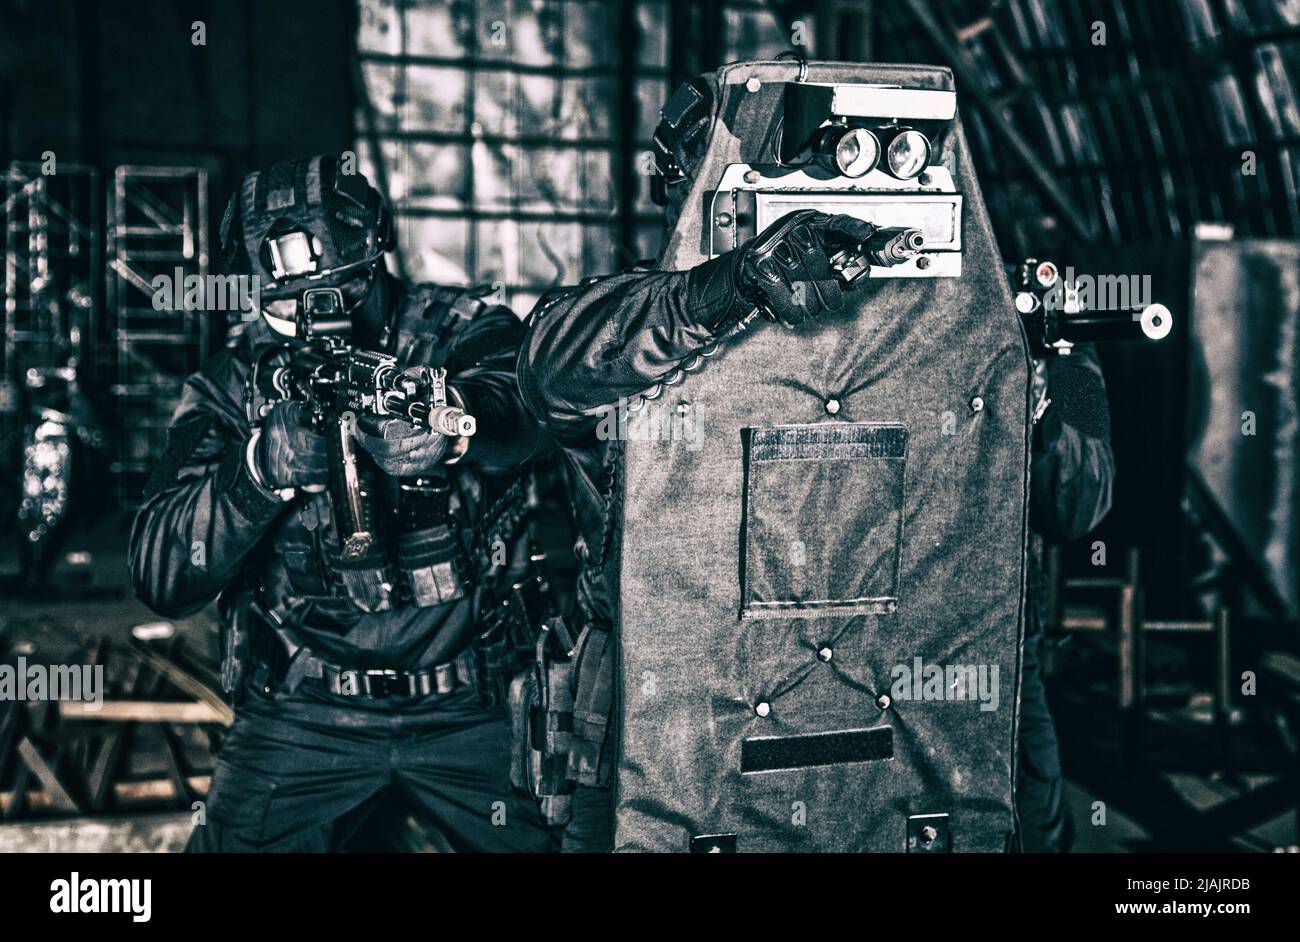 SWAT team officers aiming their weapons while hiding behind ballistic shield during a close quarters situation. Stock Photo